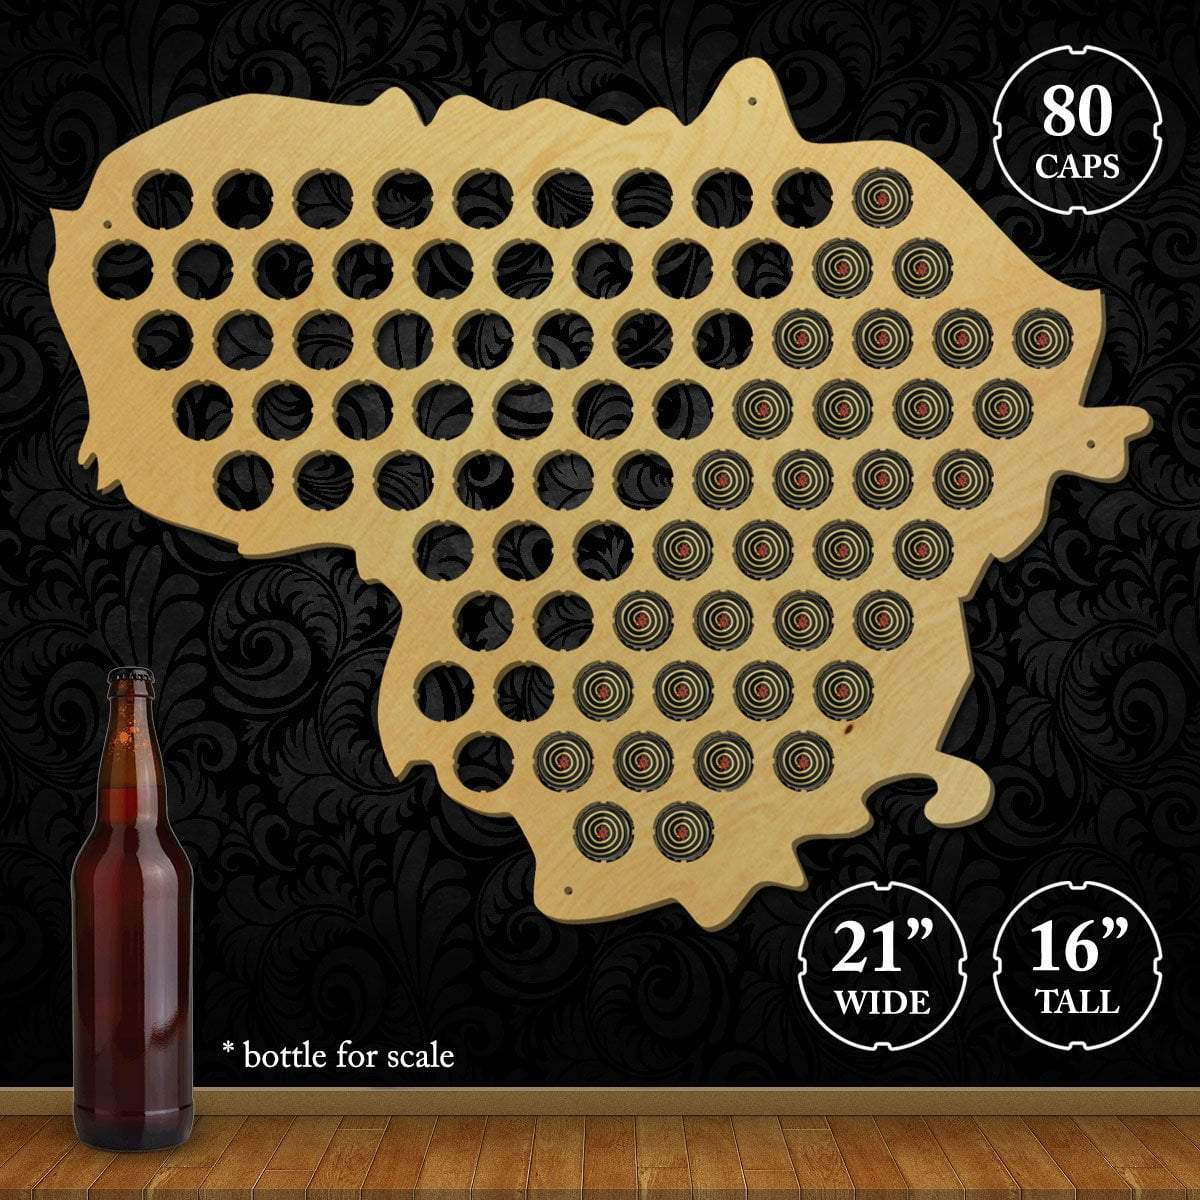 Torched Products Beer Bottle Cap Holder Lithuania Beer Cap Map (777850781813)